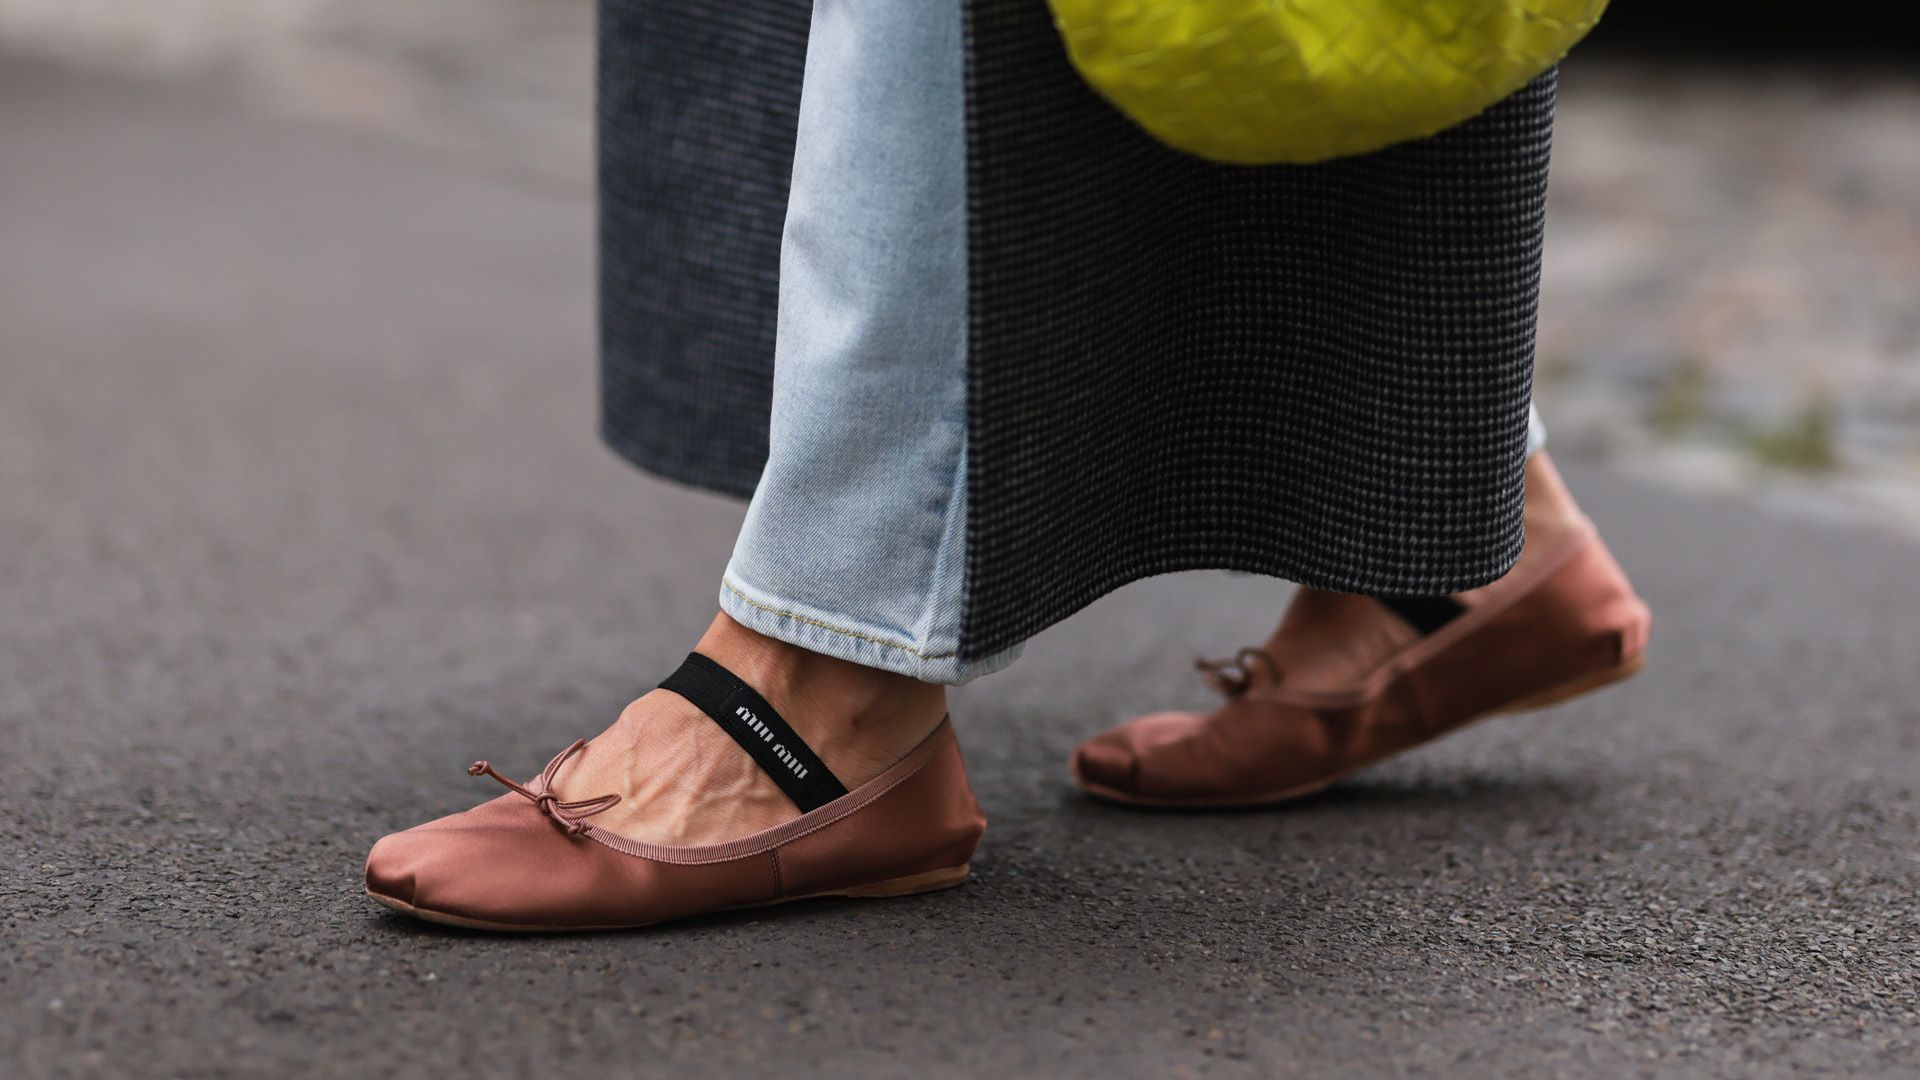 Surprising result: According to fashion analysis, these shoes are trend in 2023